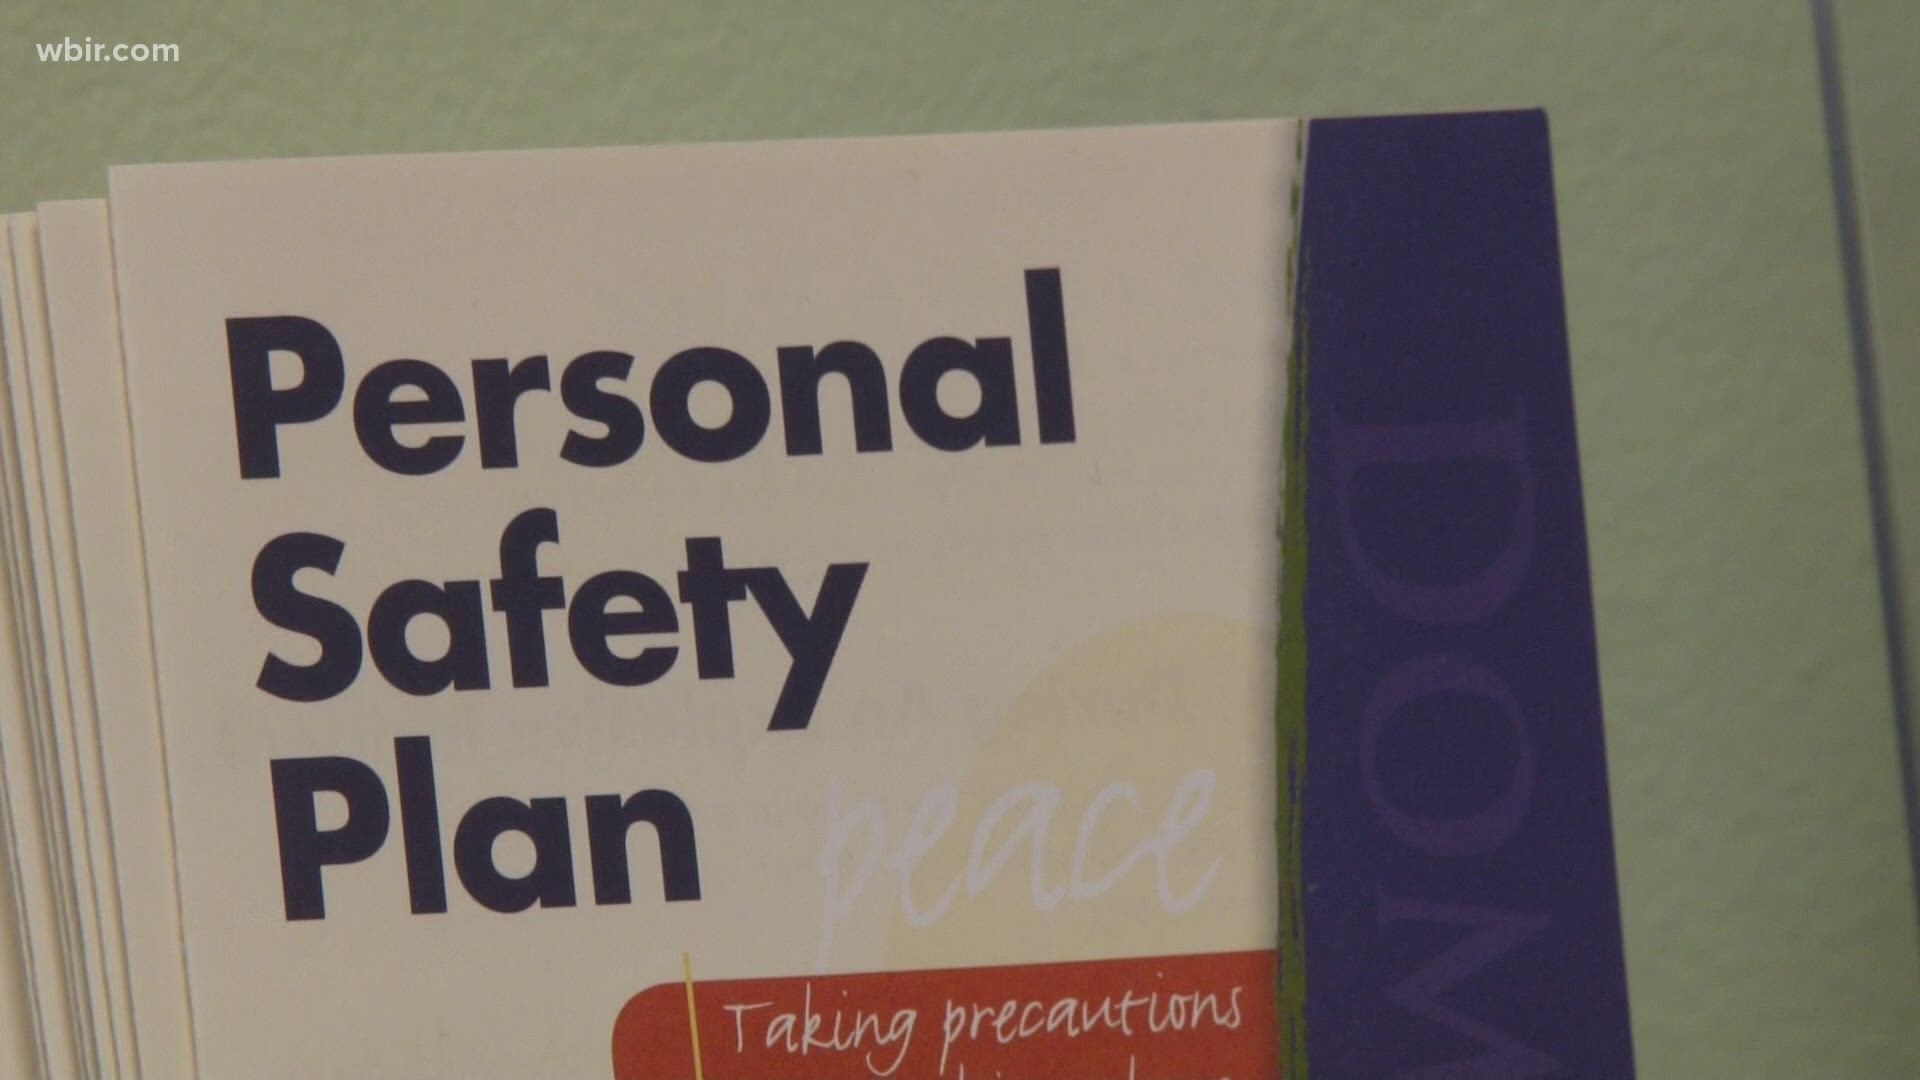 Officials said that on average, someone calls 911 every 30 minutes in Knox County for domestic violence.